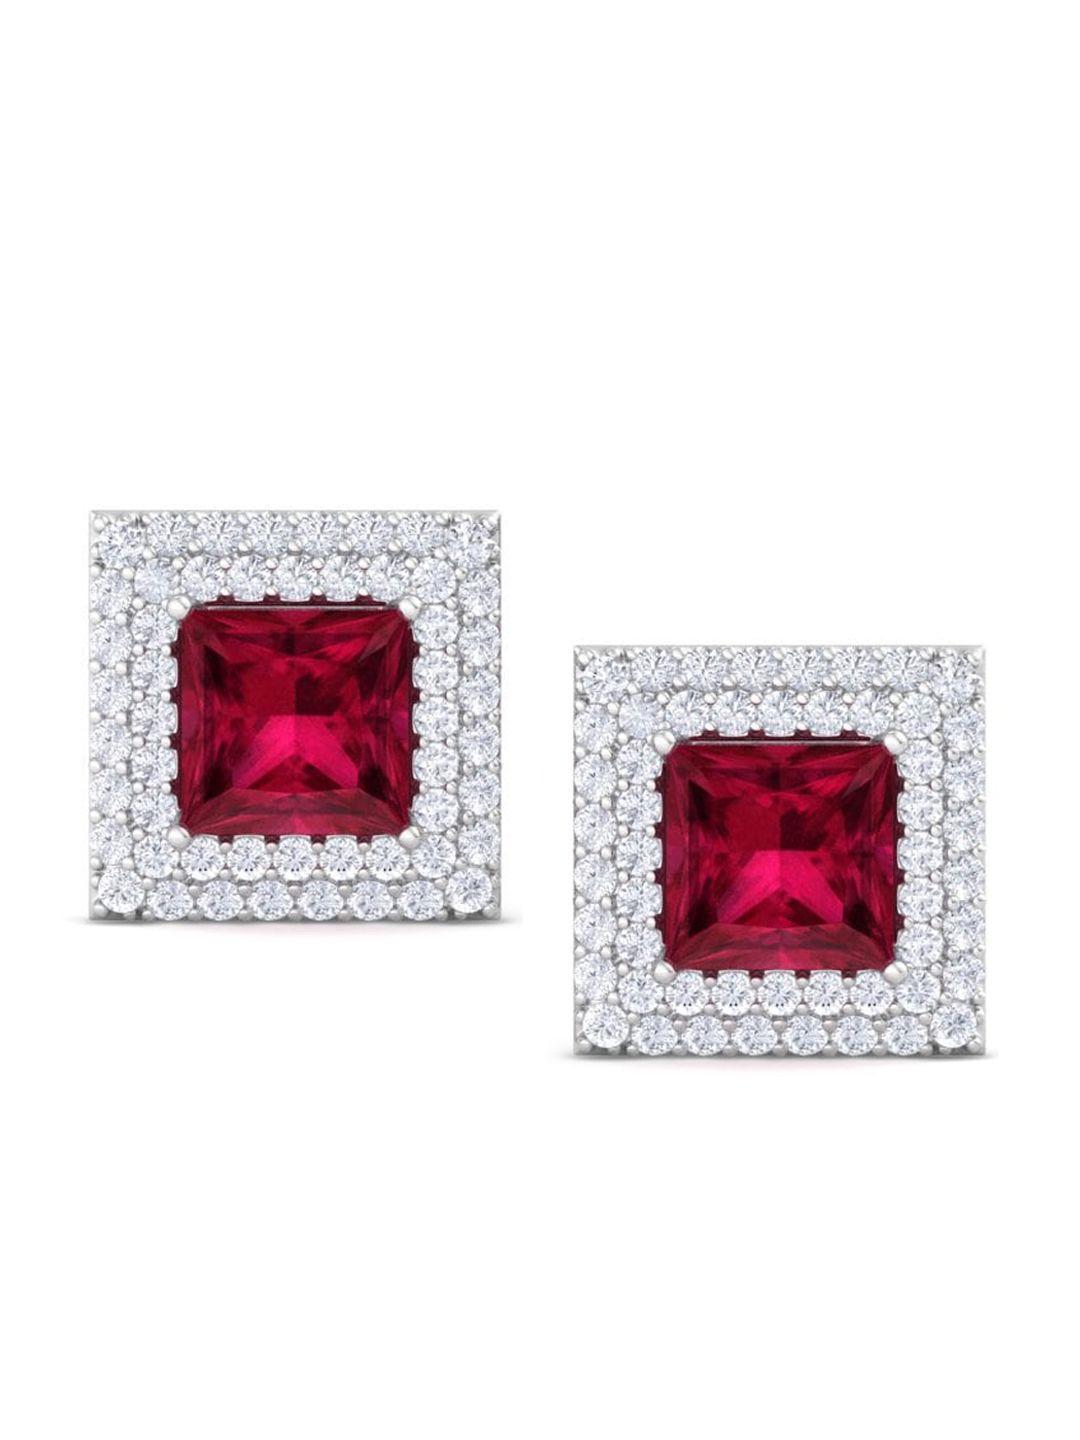 inddus jewels rhodium-plated square studs earrings